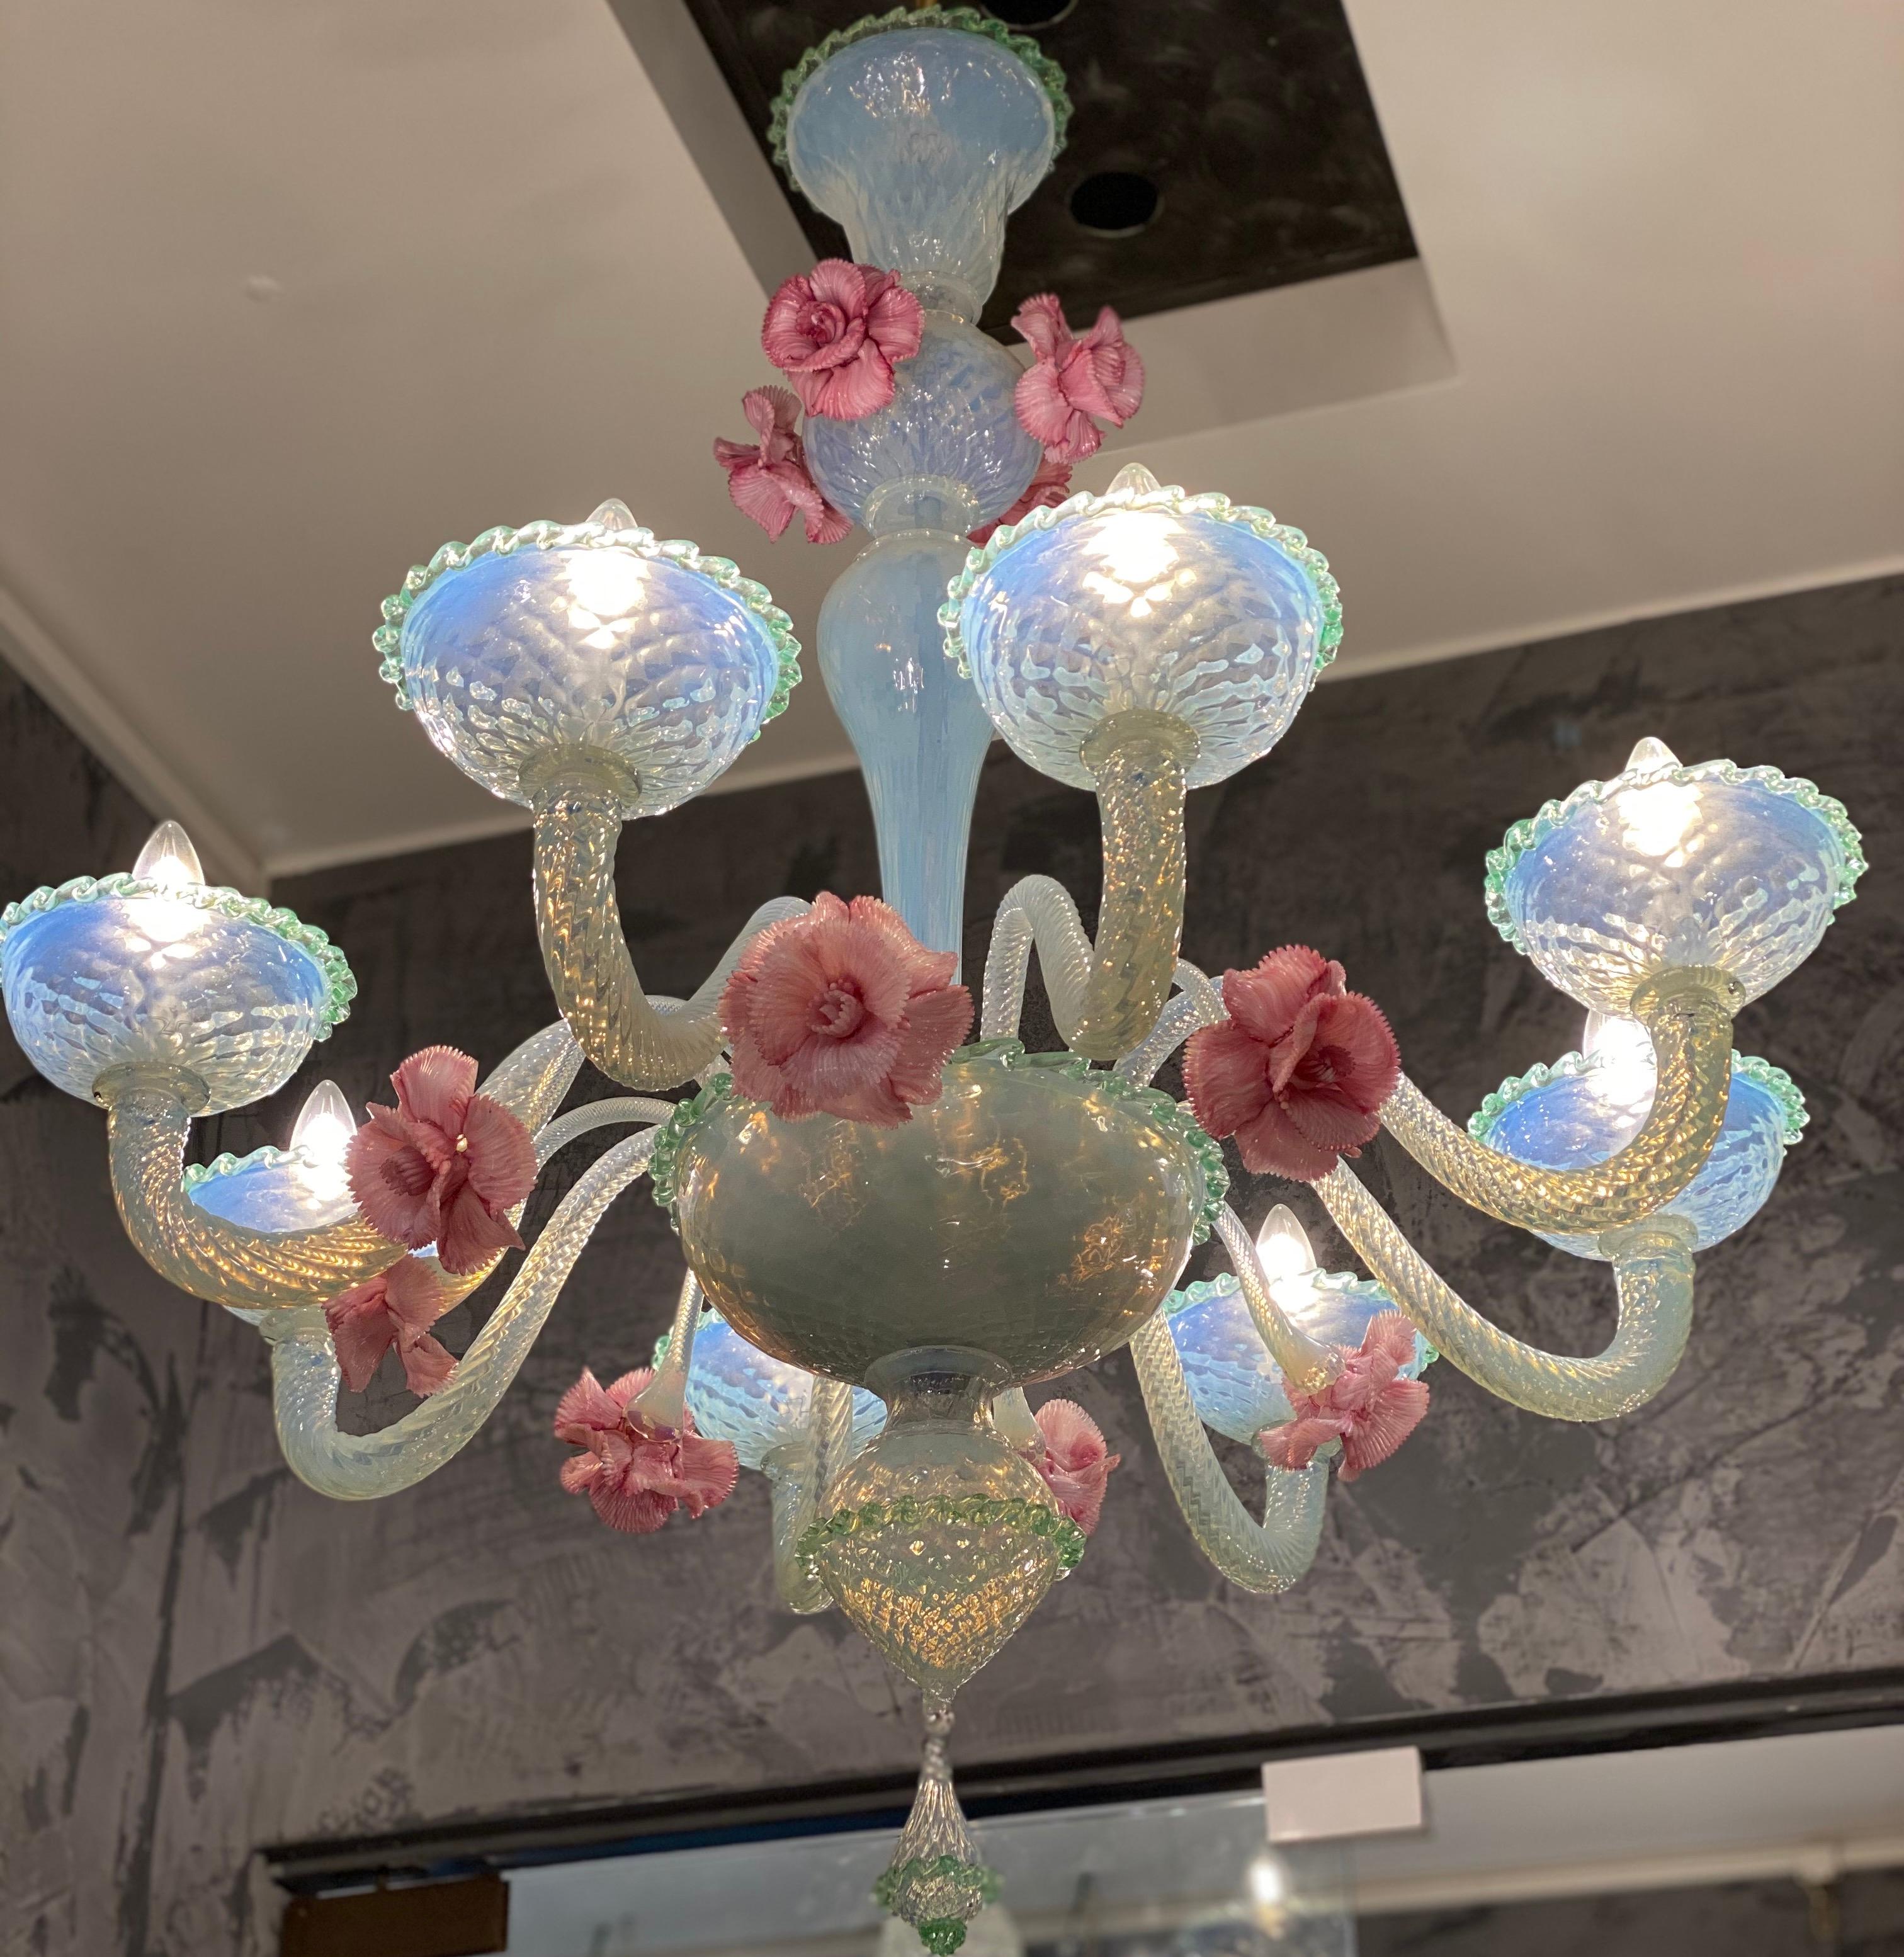 Amazing light opaline blue iridescent Murano glass chandeliers with eight arms decorated with pink pasta vitrea flowers.
Unique piece.